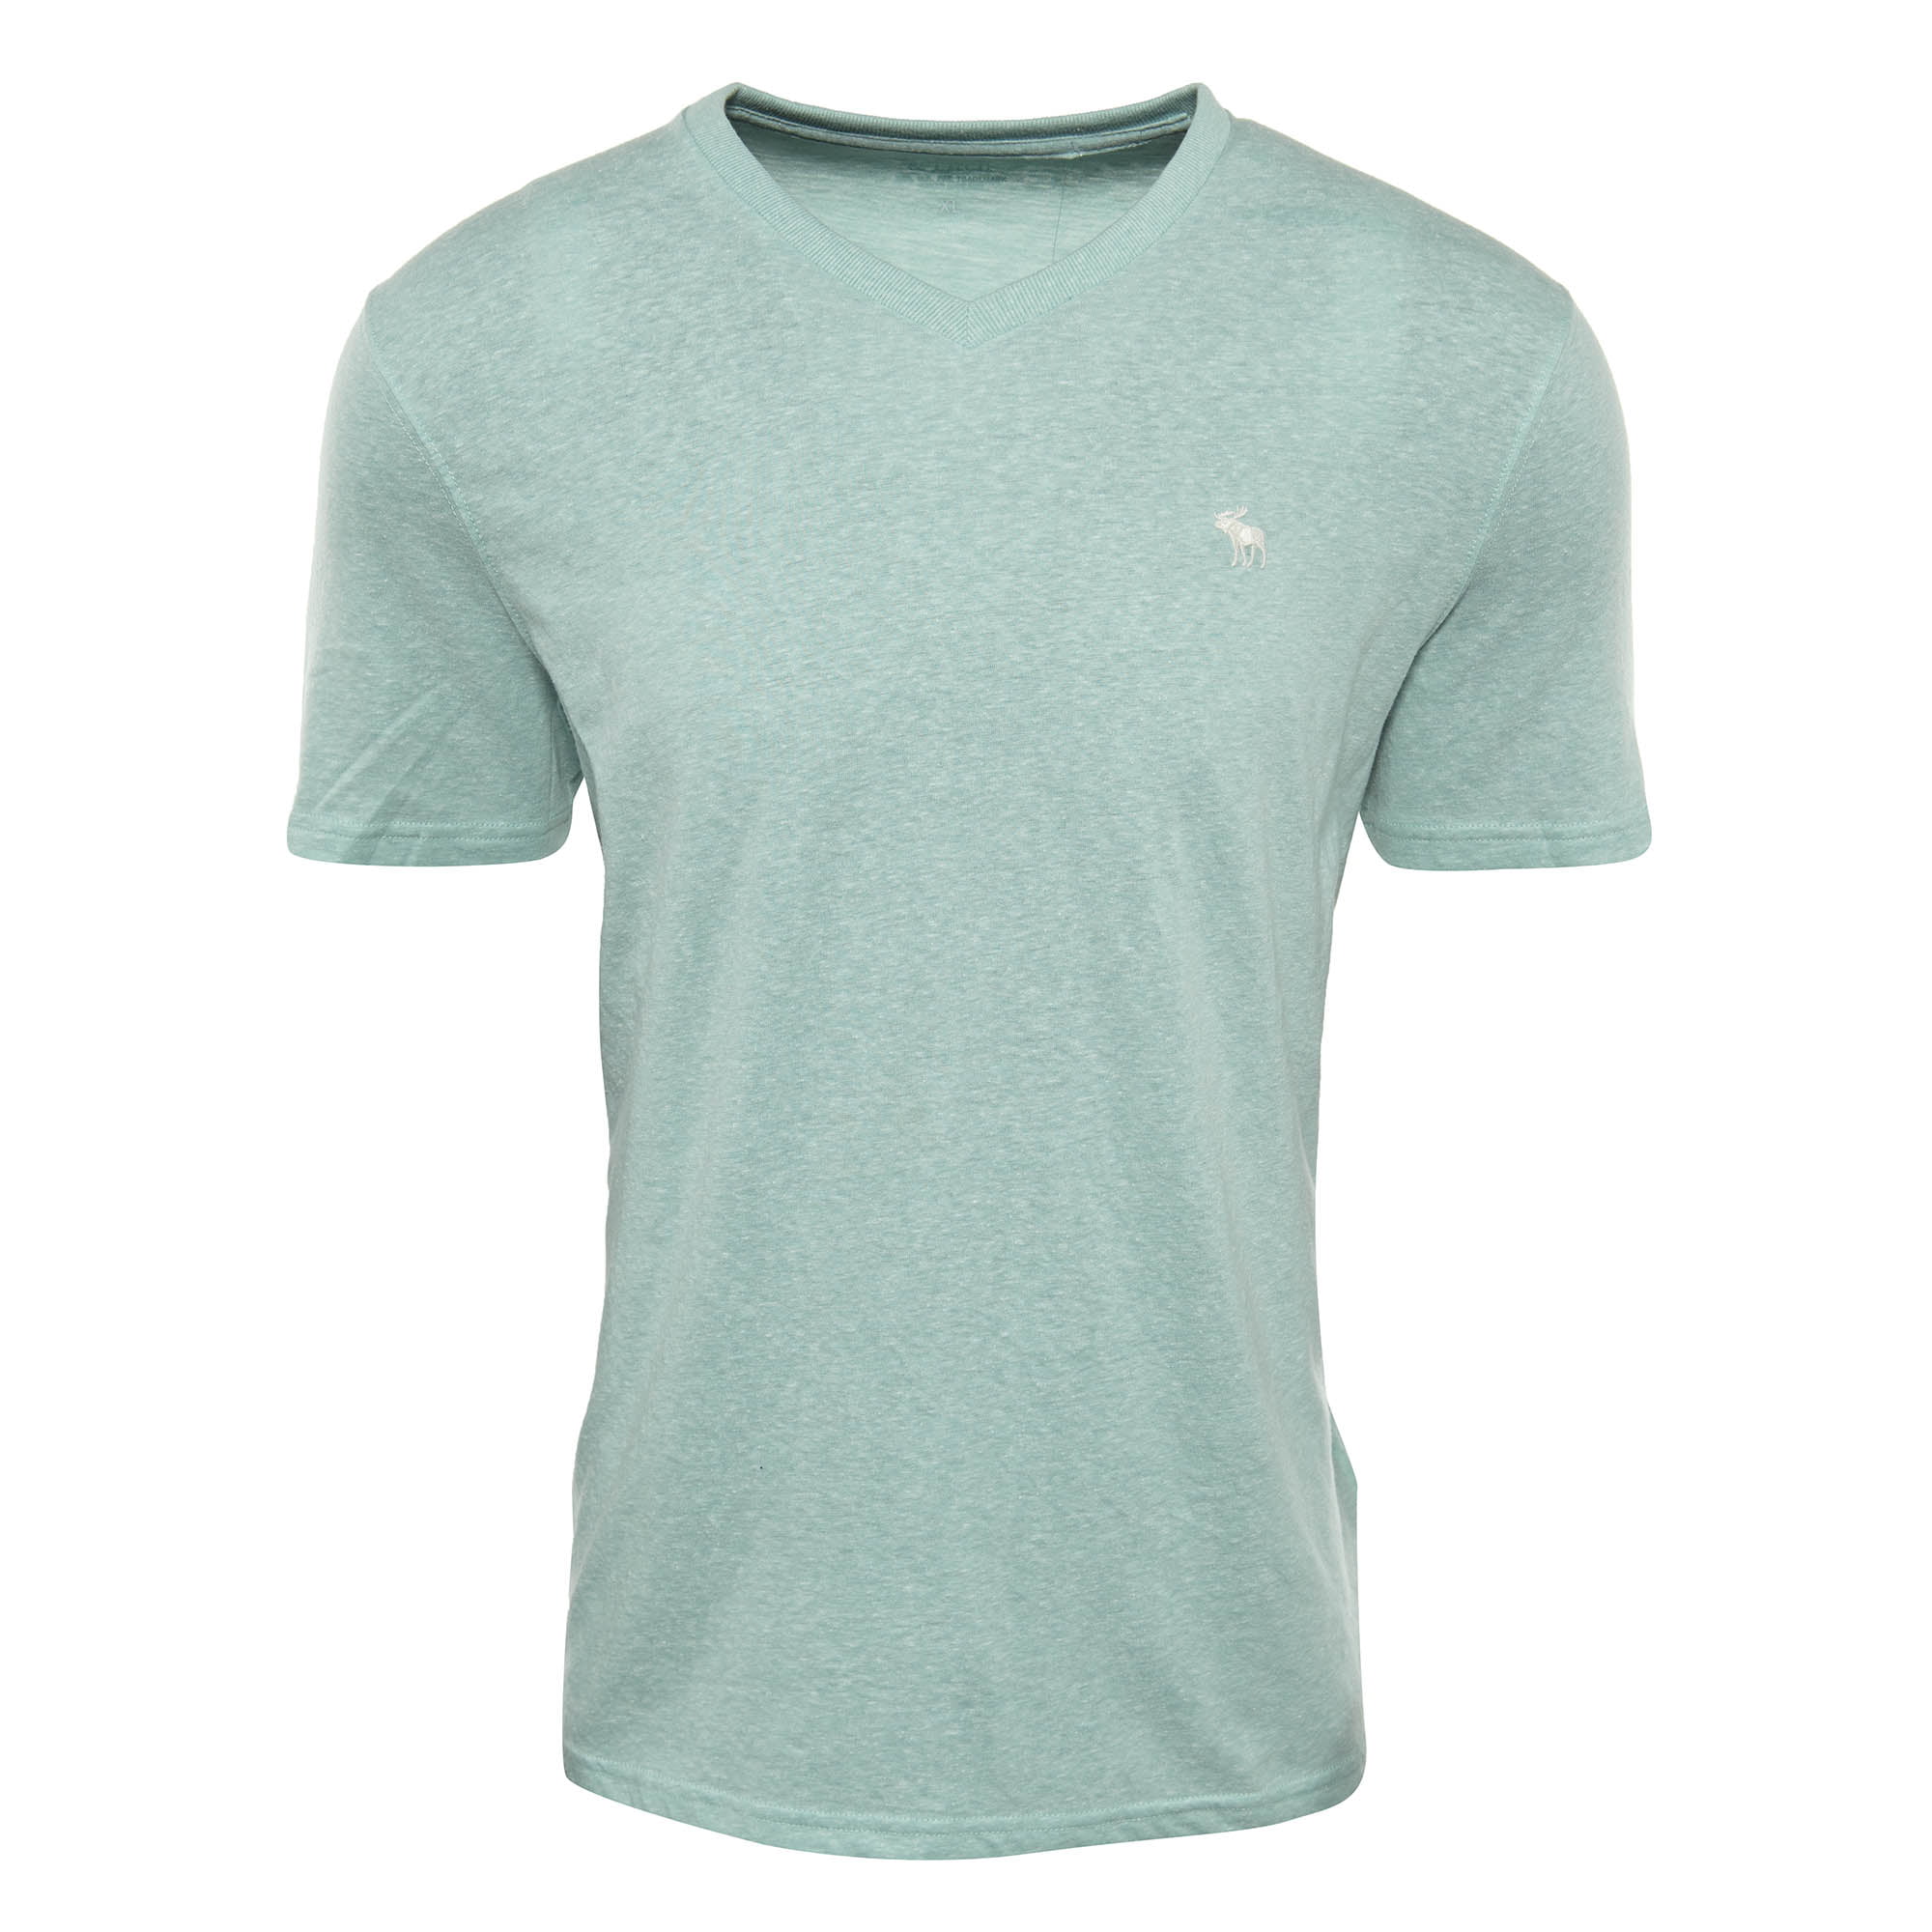 abercrombie and fitch v neck t-shirt